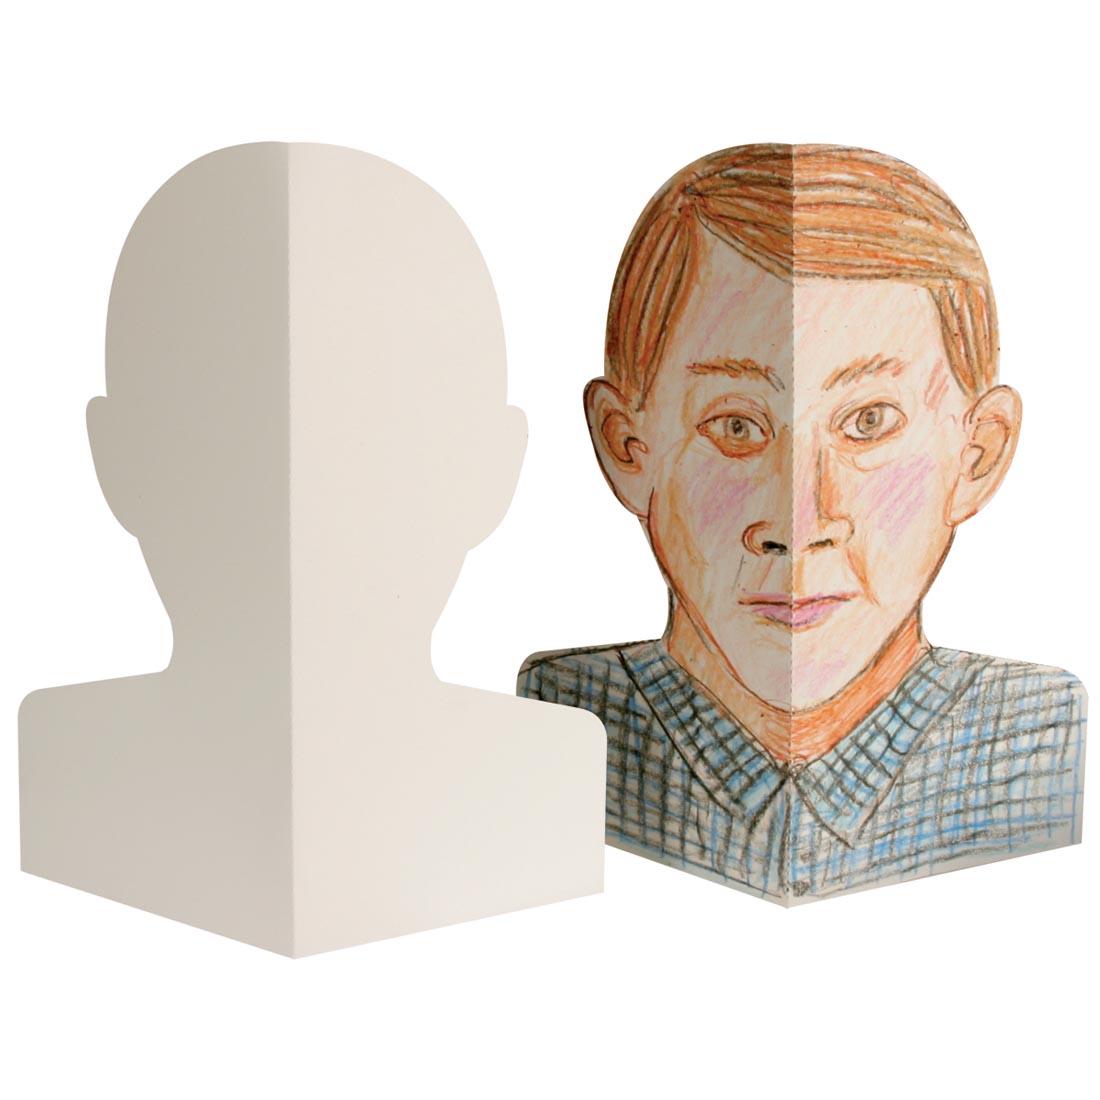 A blank Roylco Stand Up Self Portrait beside a completed example